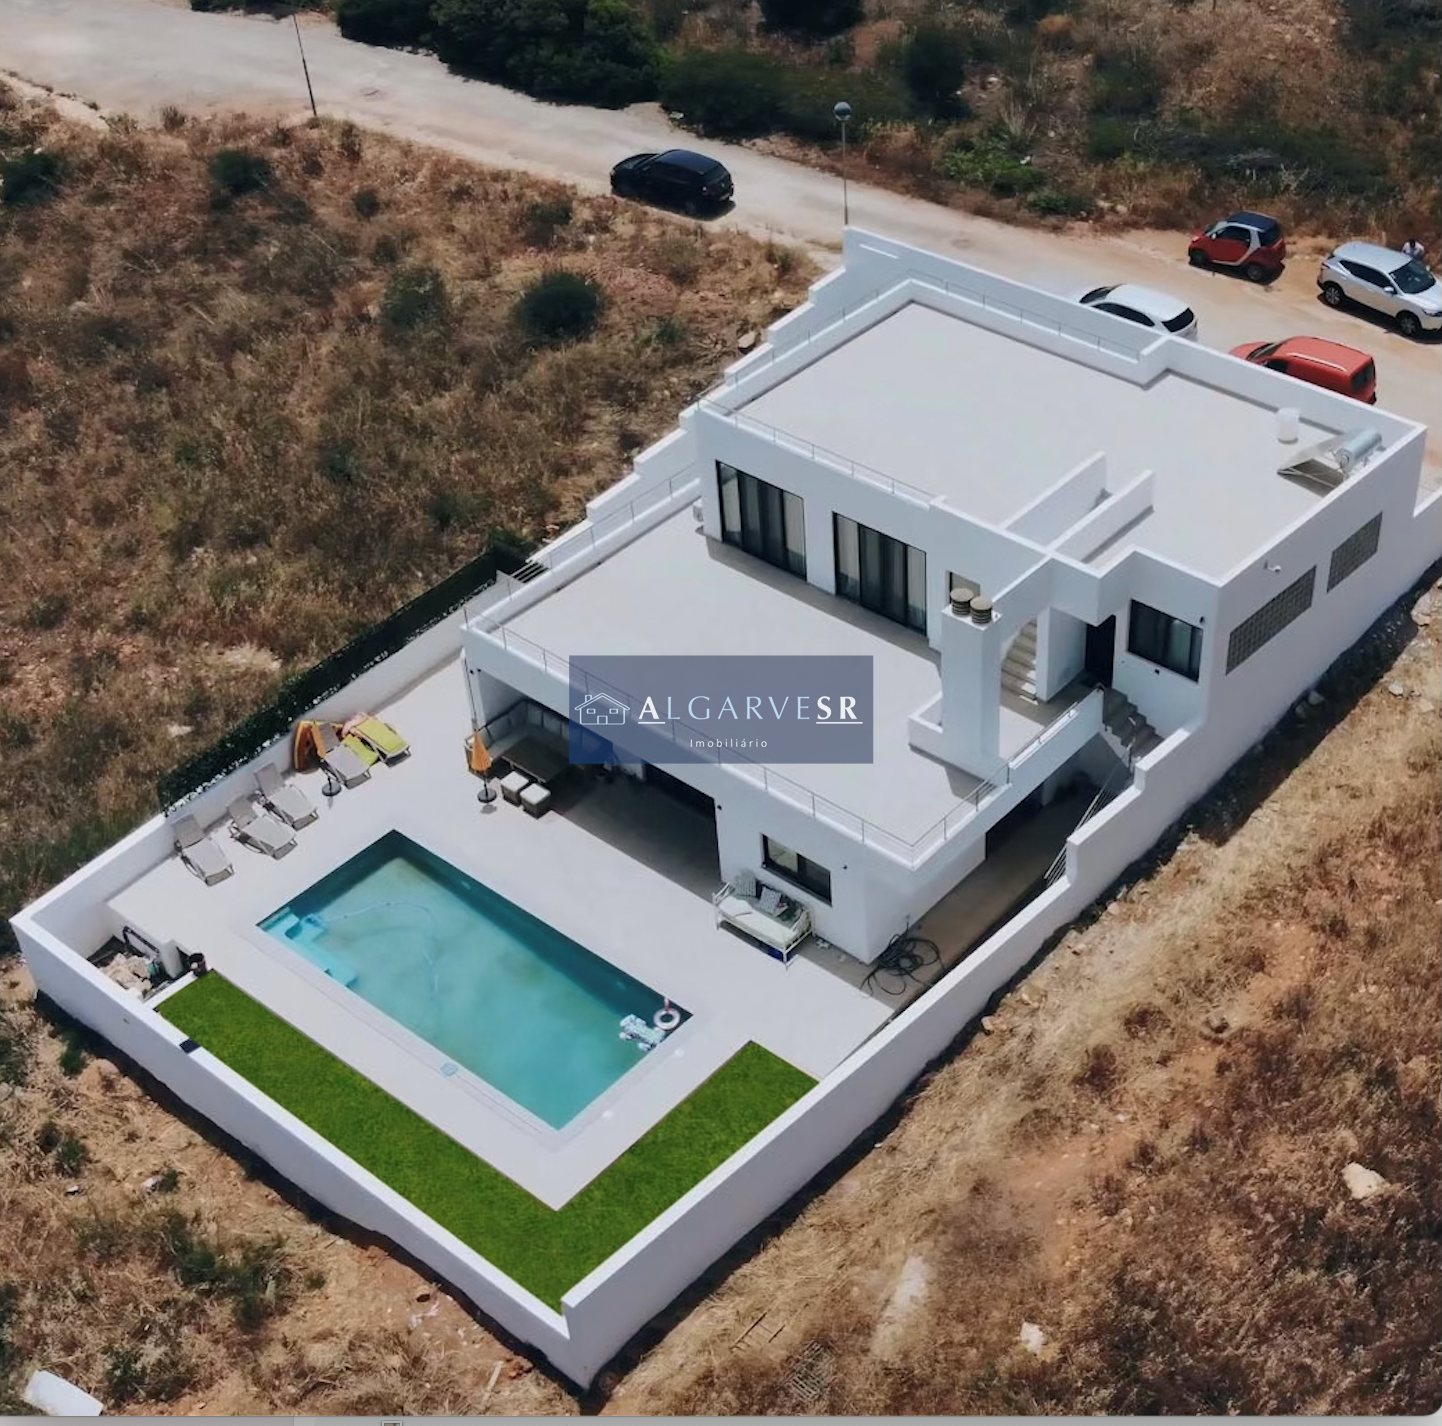 Larger than average 3 bedroom villa with private pool and garage - Fontainhas  - 